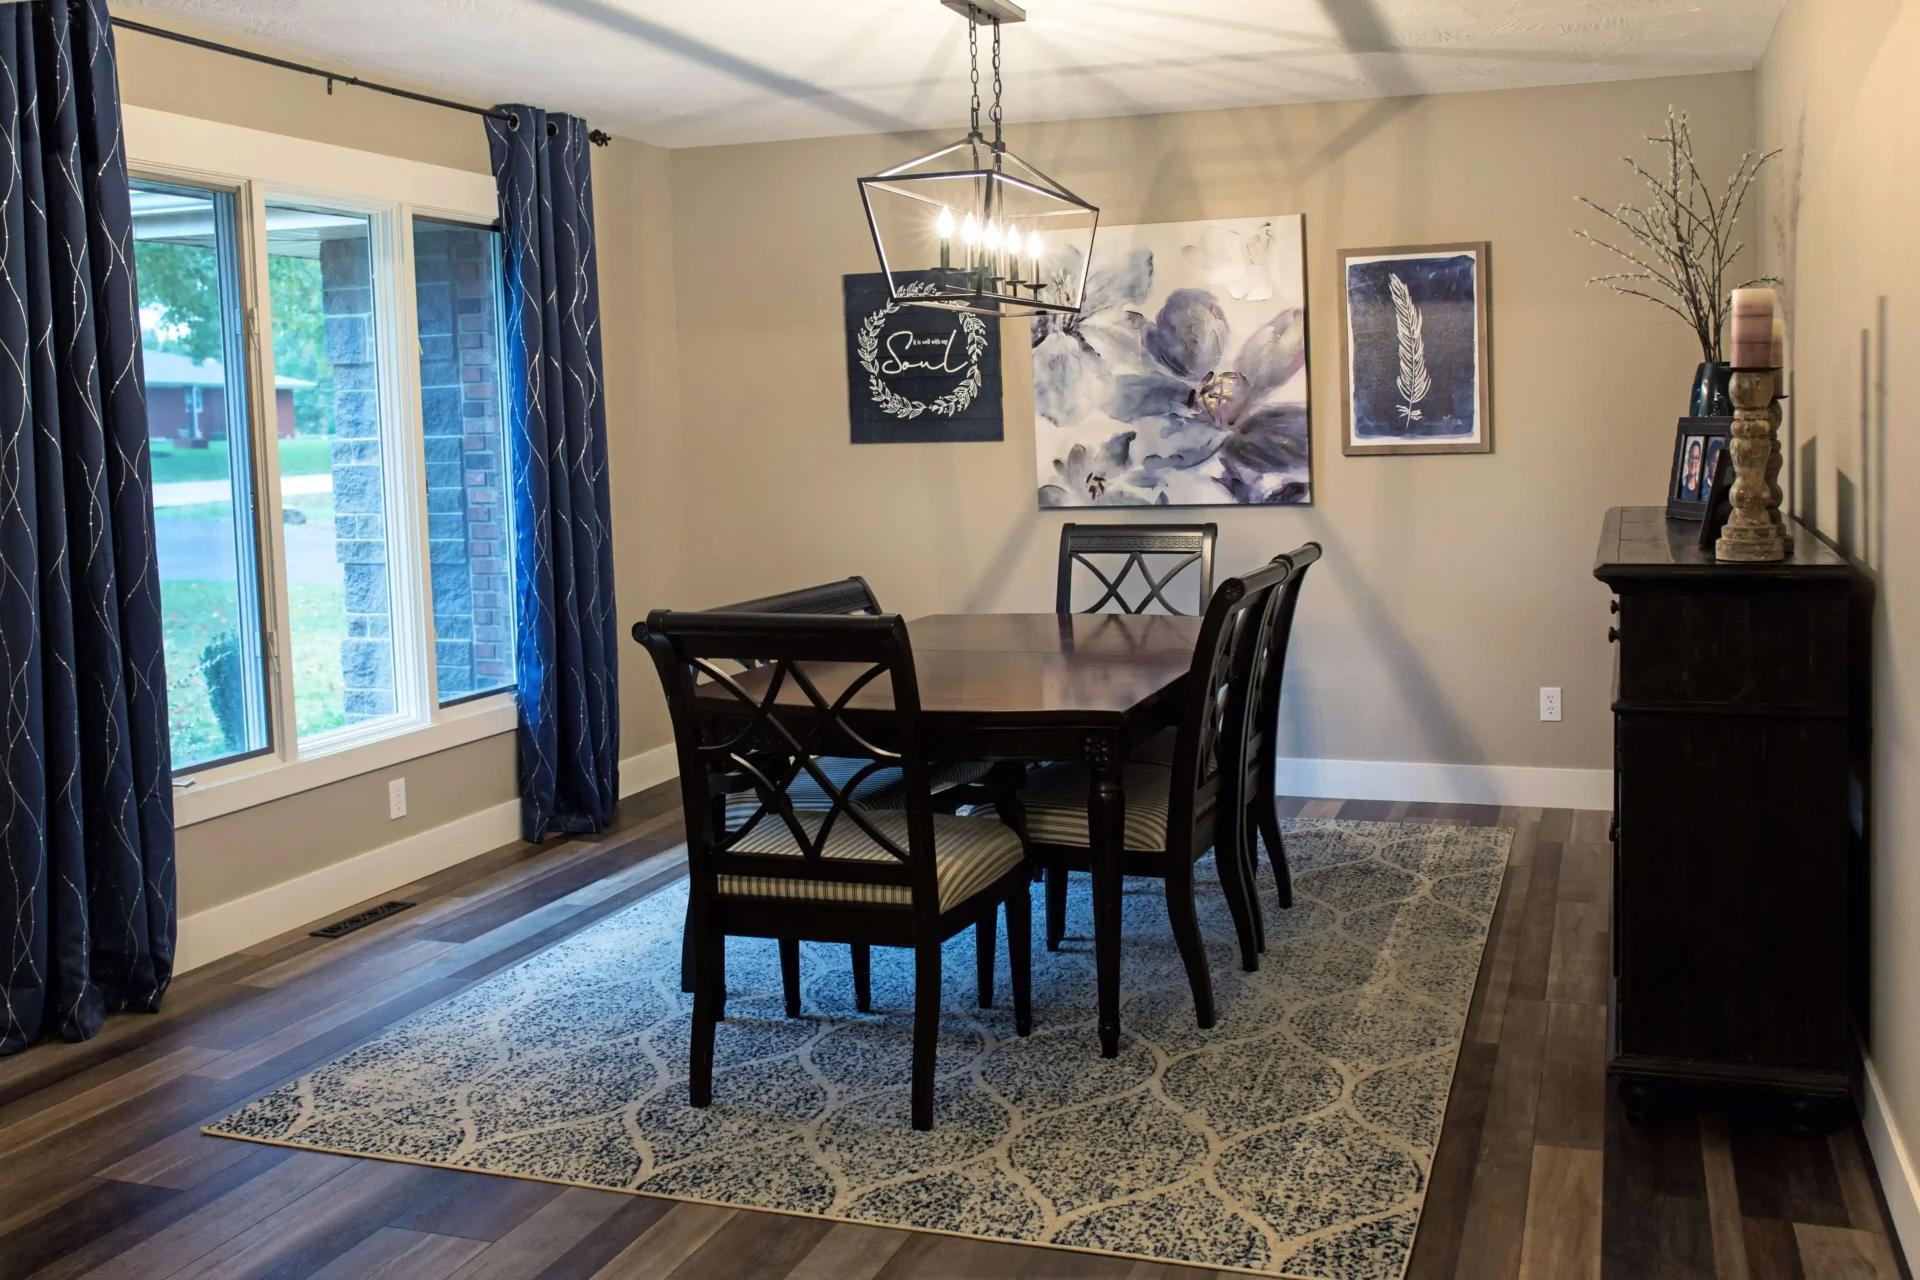 A dining room for a small group